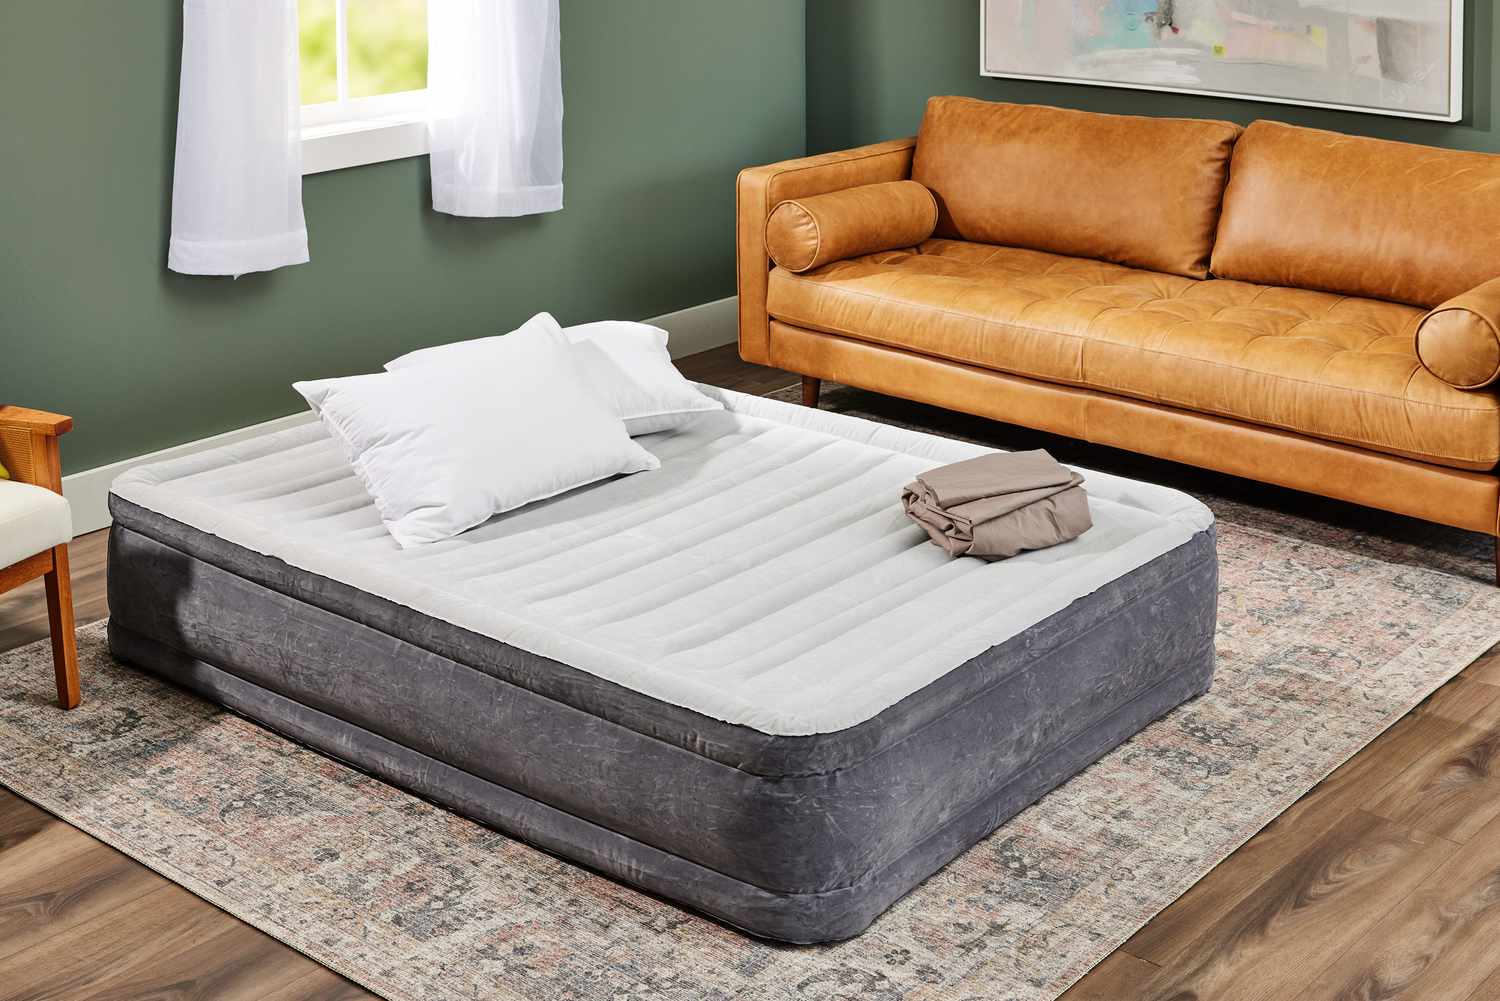 Intex Dura-Beam Comfort Mid-Rise Air Mattress inflated near a window and a couch